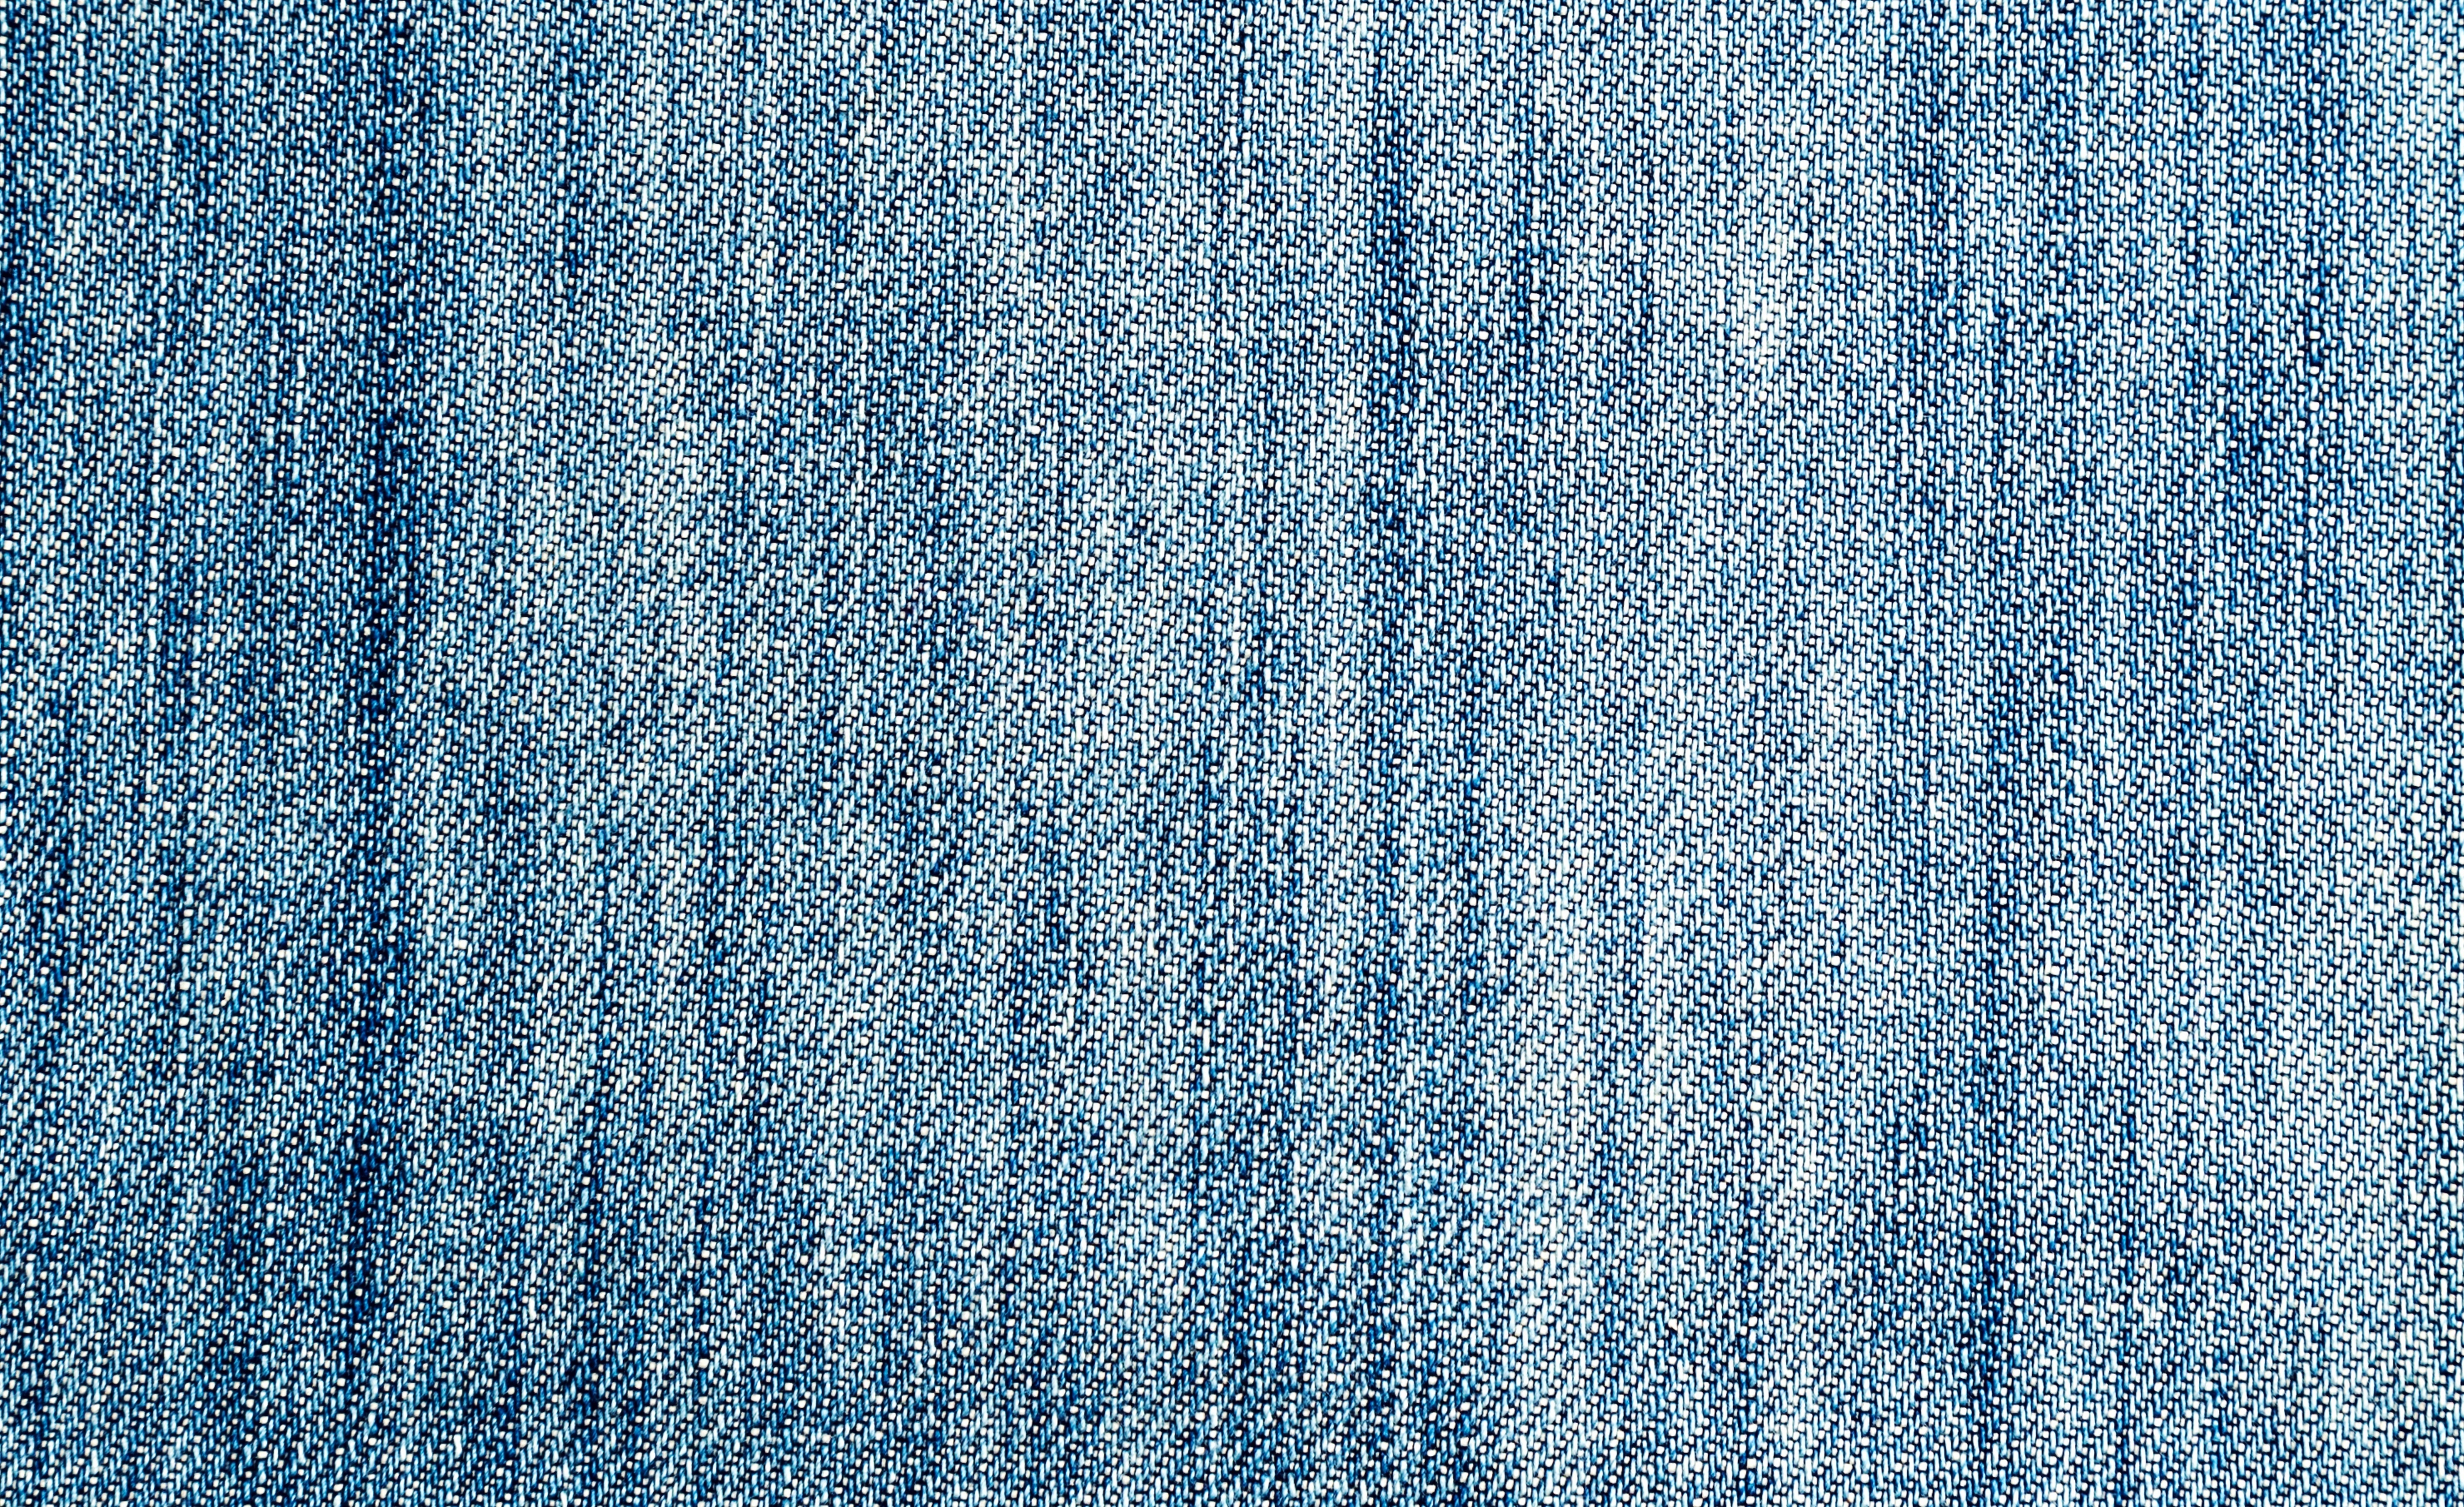 30+ Denim HD Wallpapers and Backgrounds